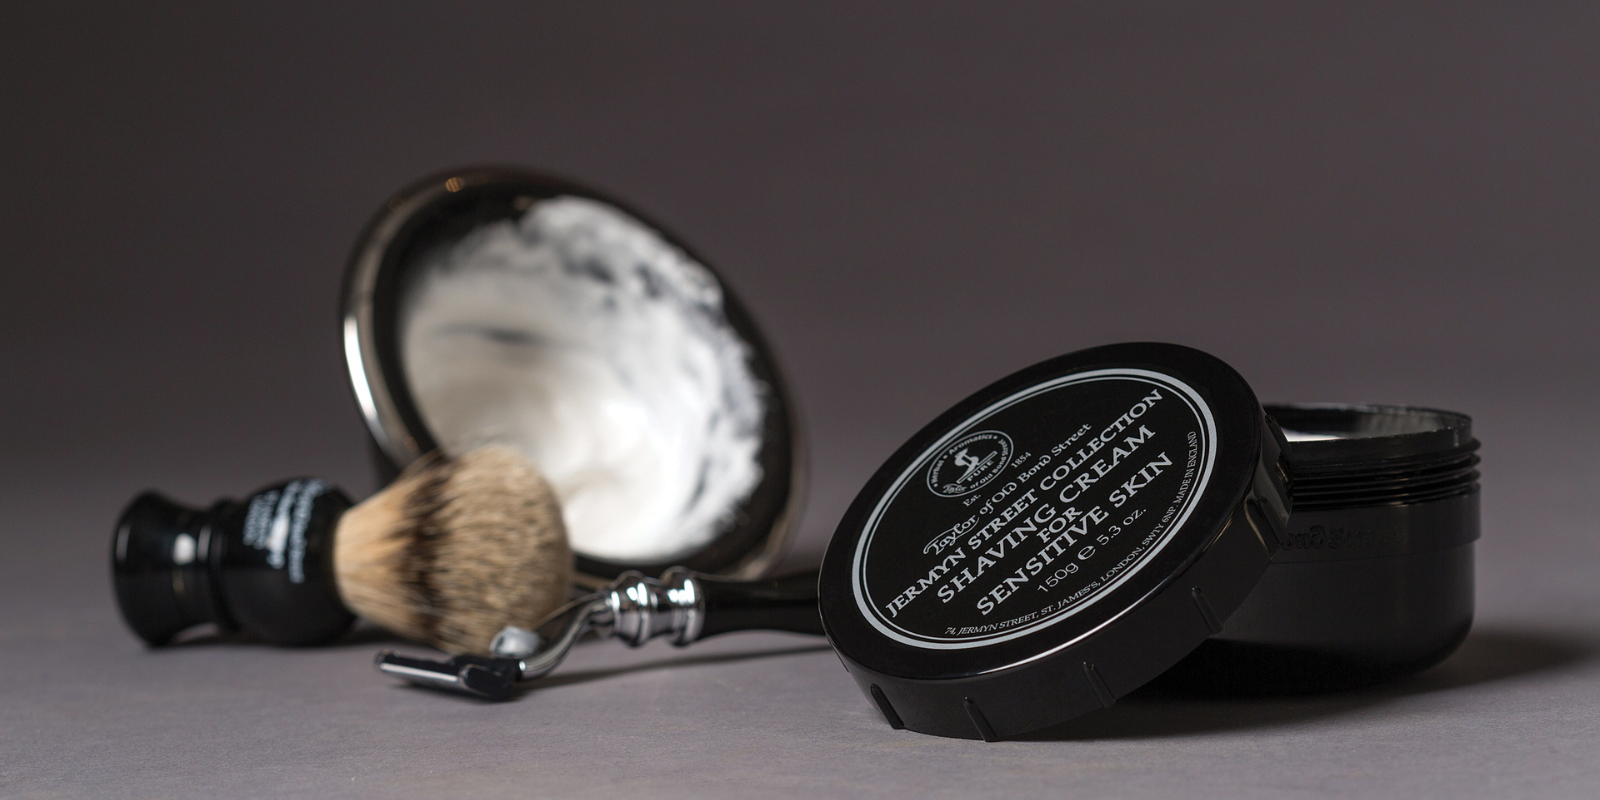 Luxury Grooming Products for Men | Taylor Old Bond Street Est. 1854